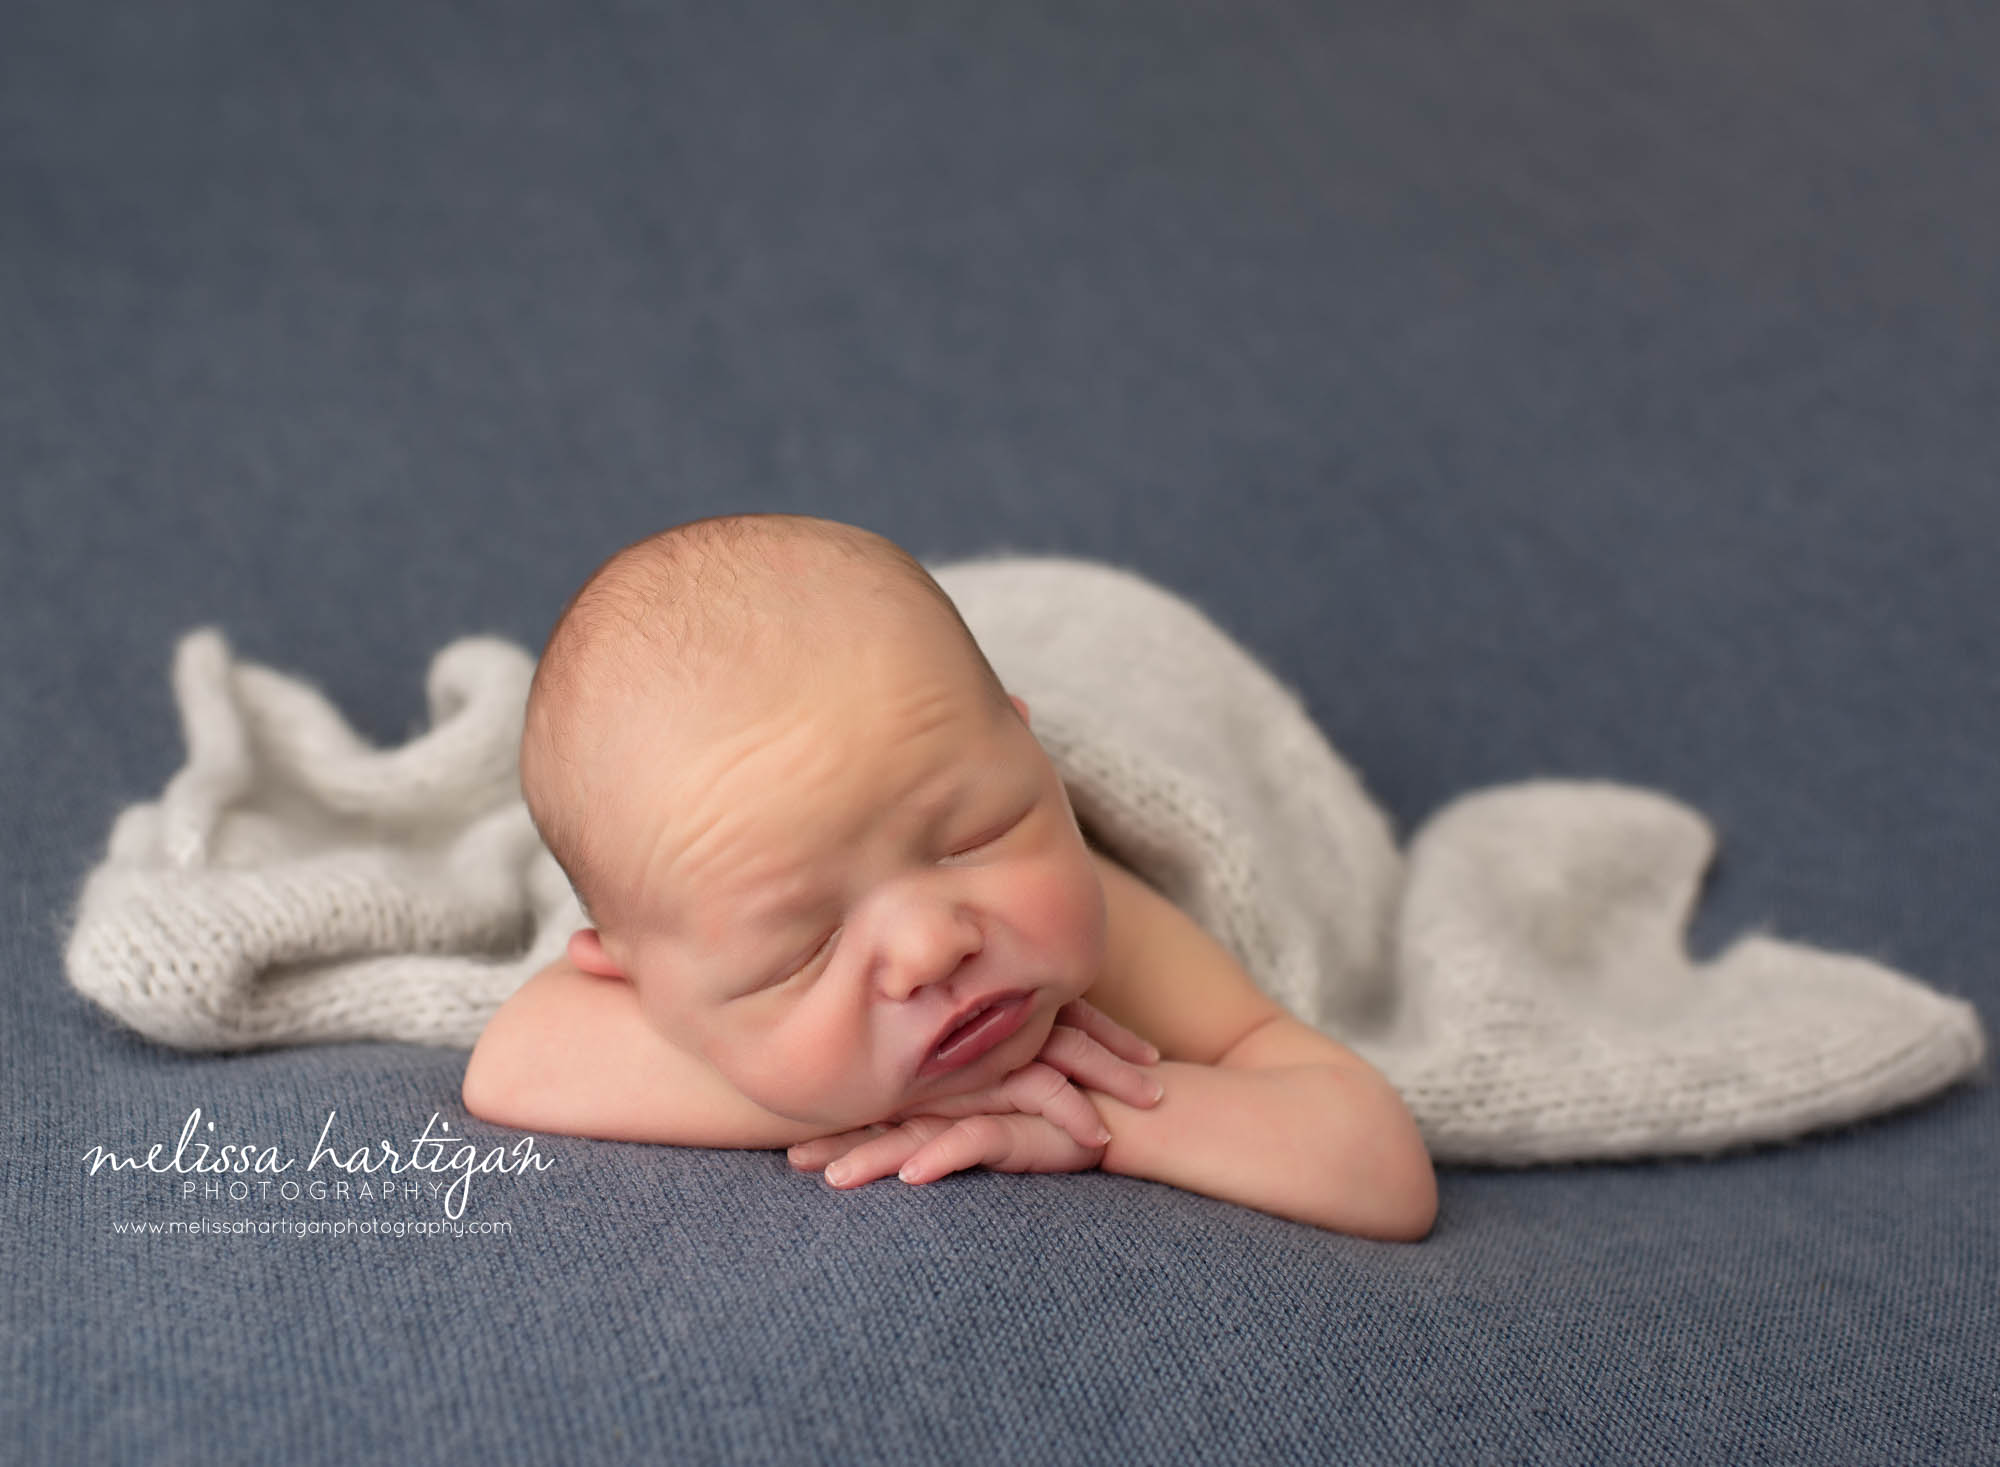 newborn baby boy posed with chin on hands forward facing newborn photography studio session